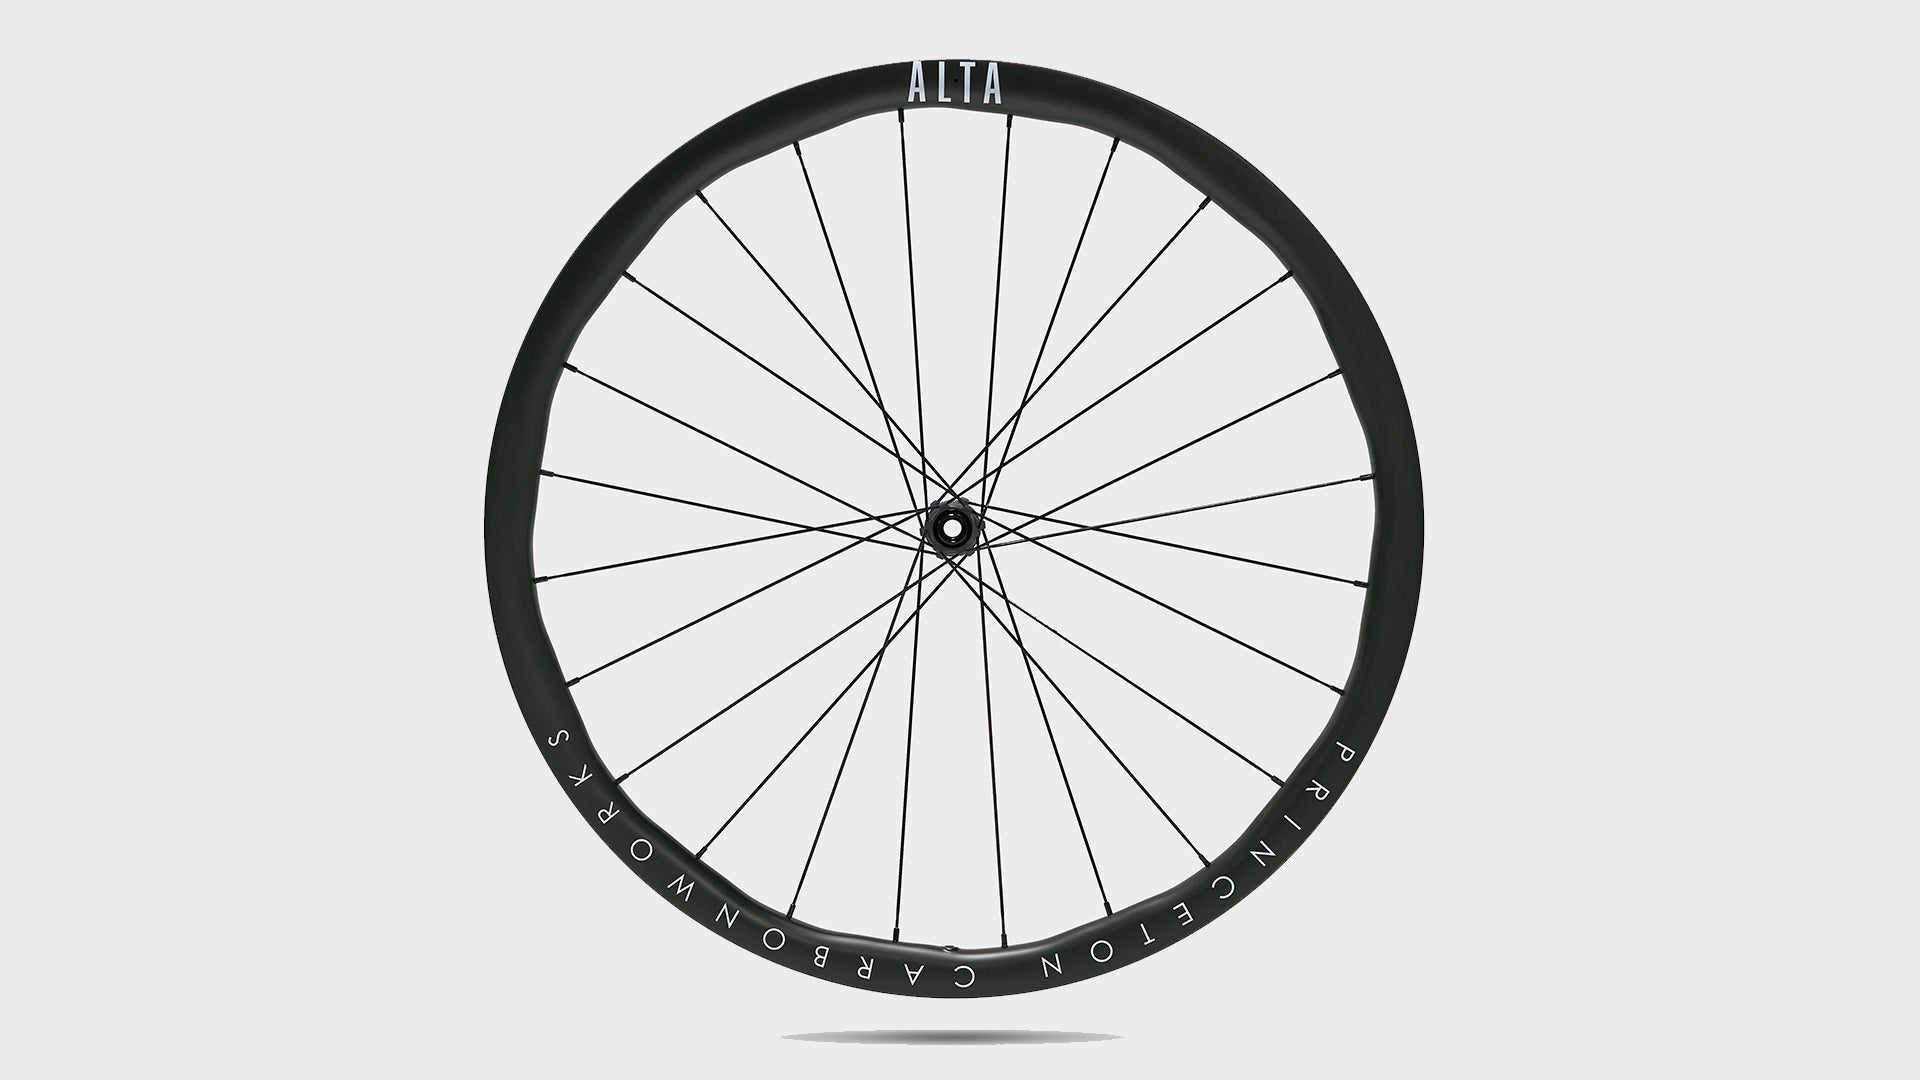 New Princeton CarbonWorks Alta 3532 wheelset goes after the weight 